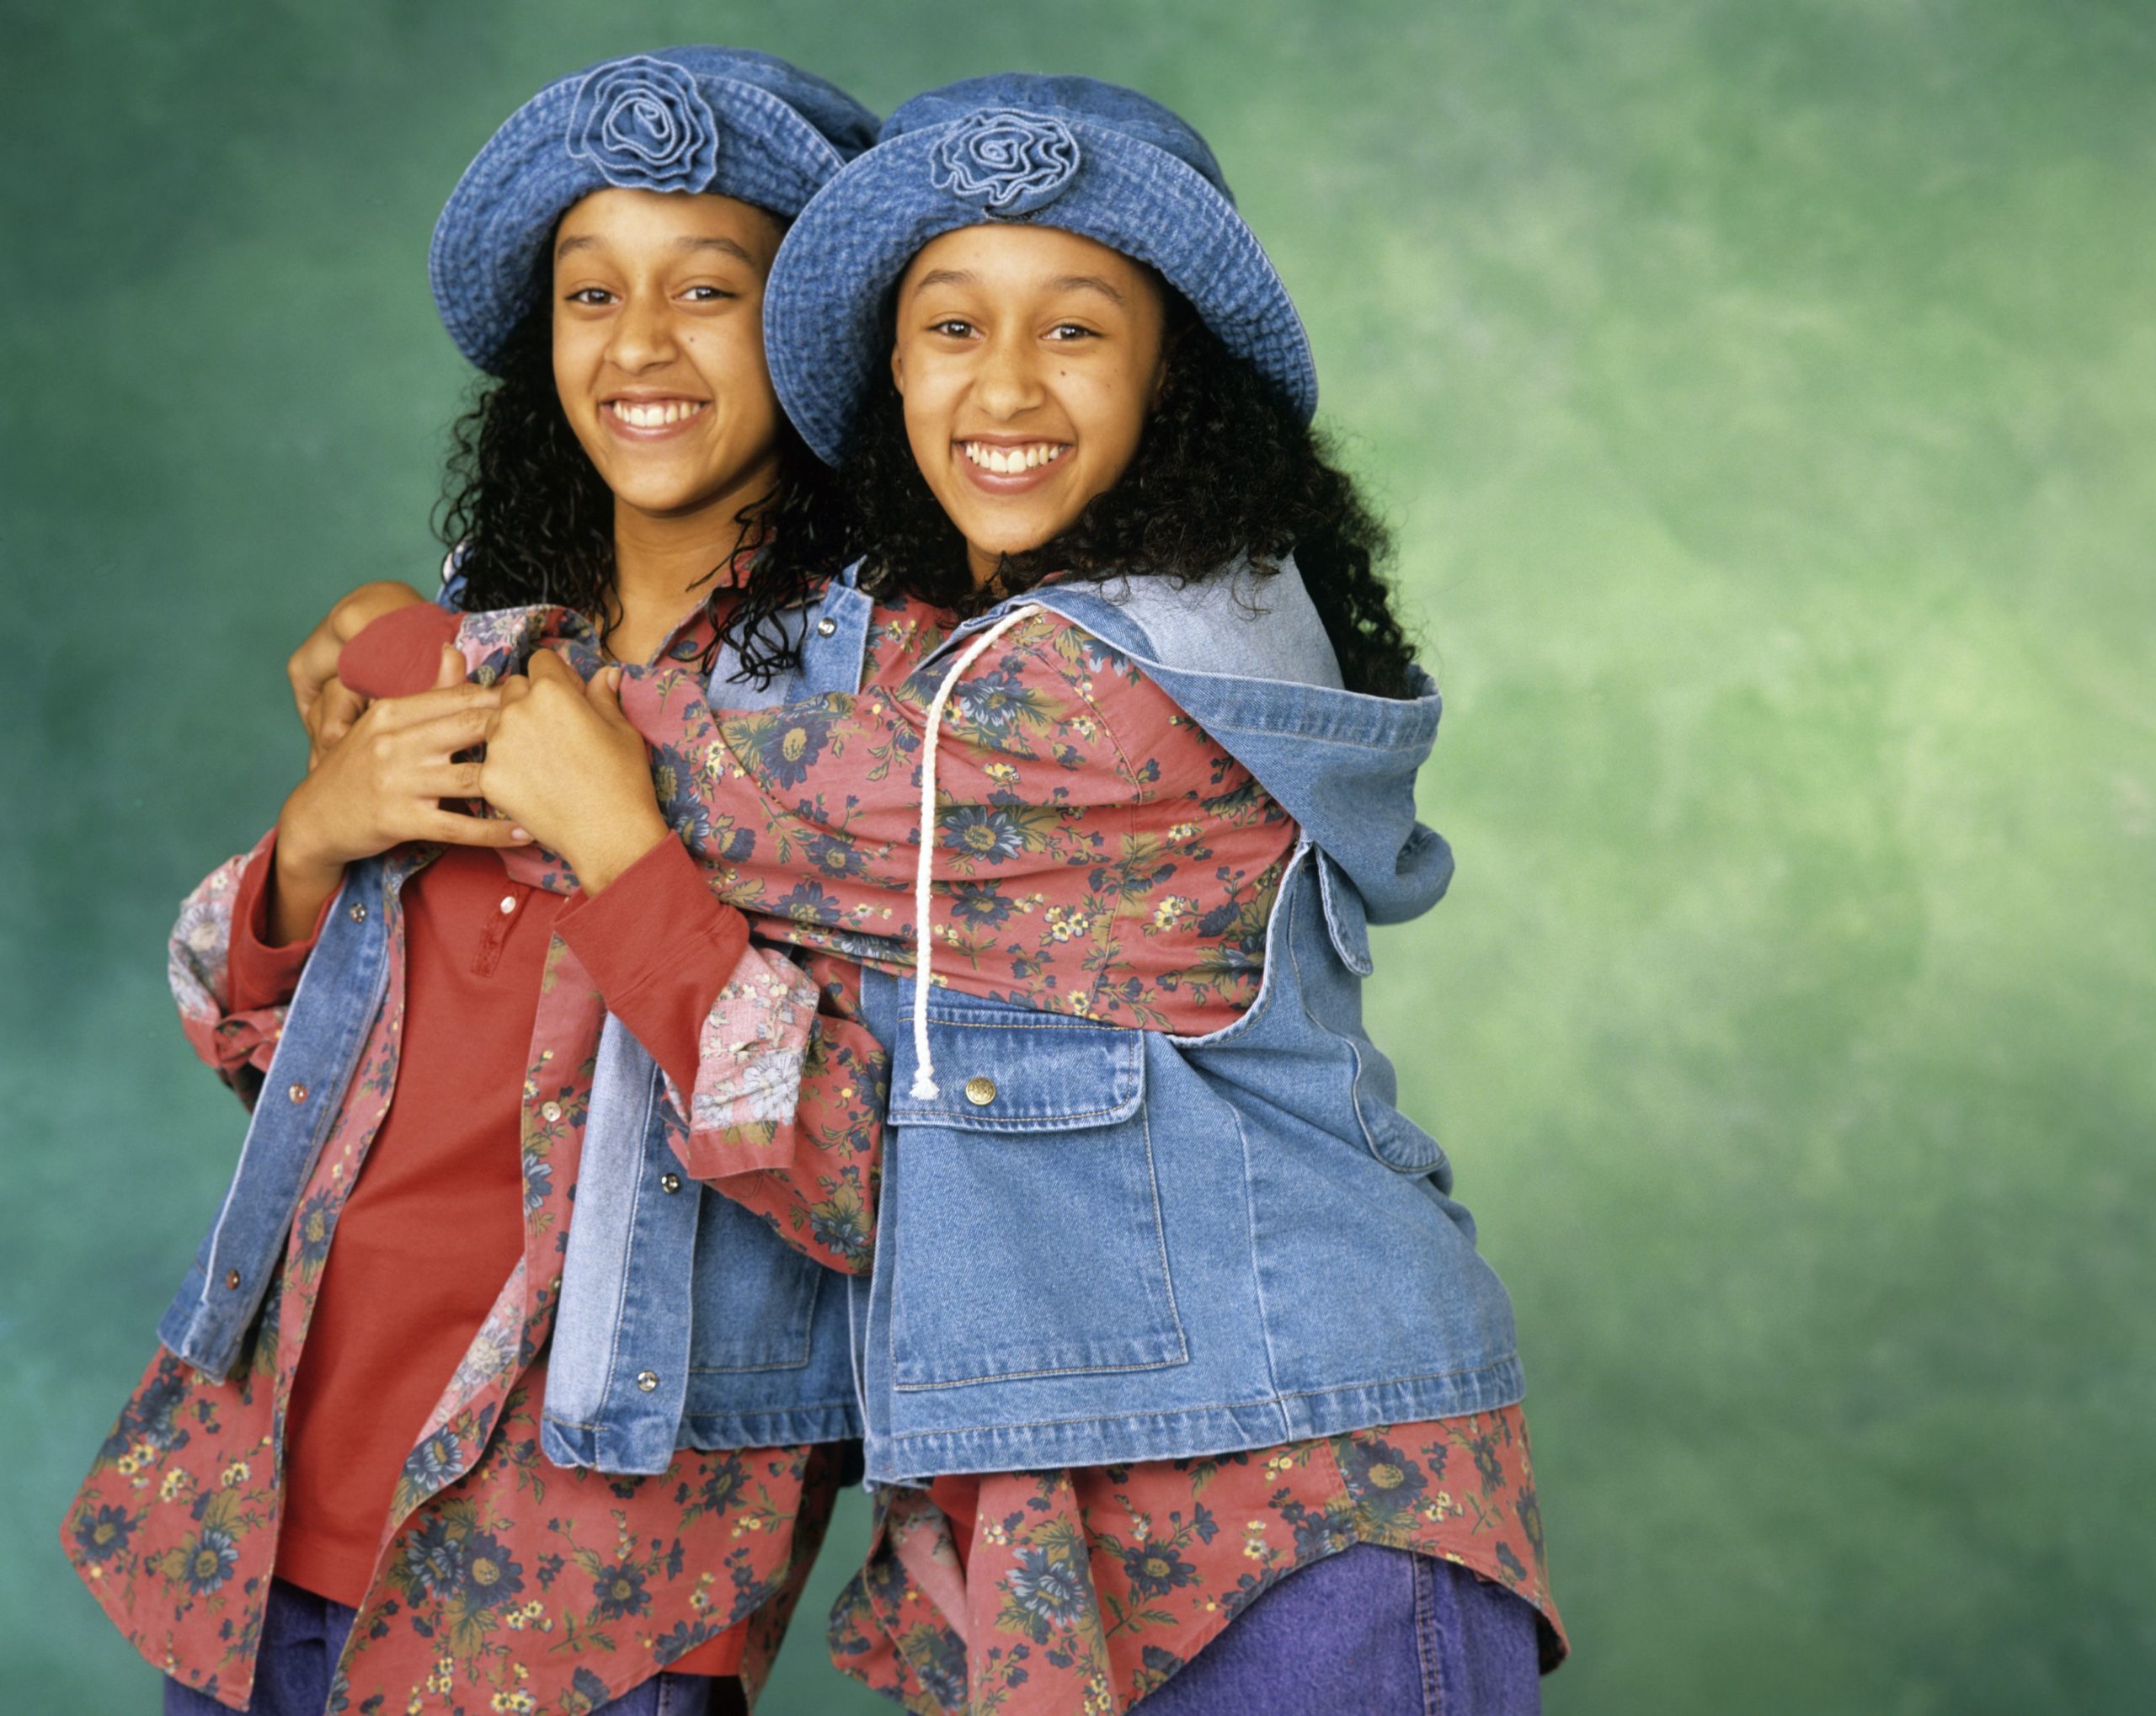 Tia Mowry about "Sister Sister" Reboot